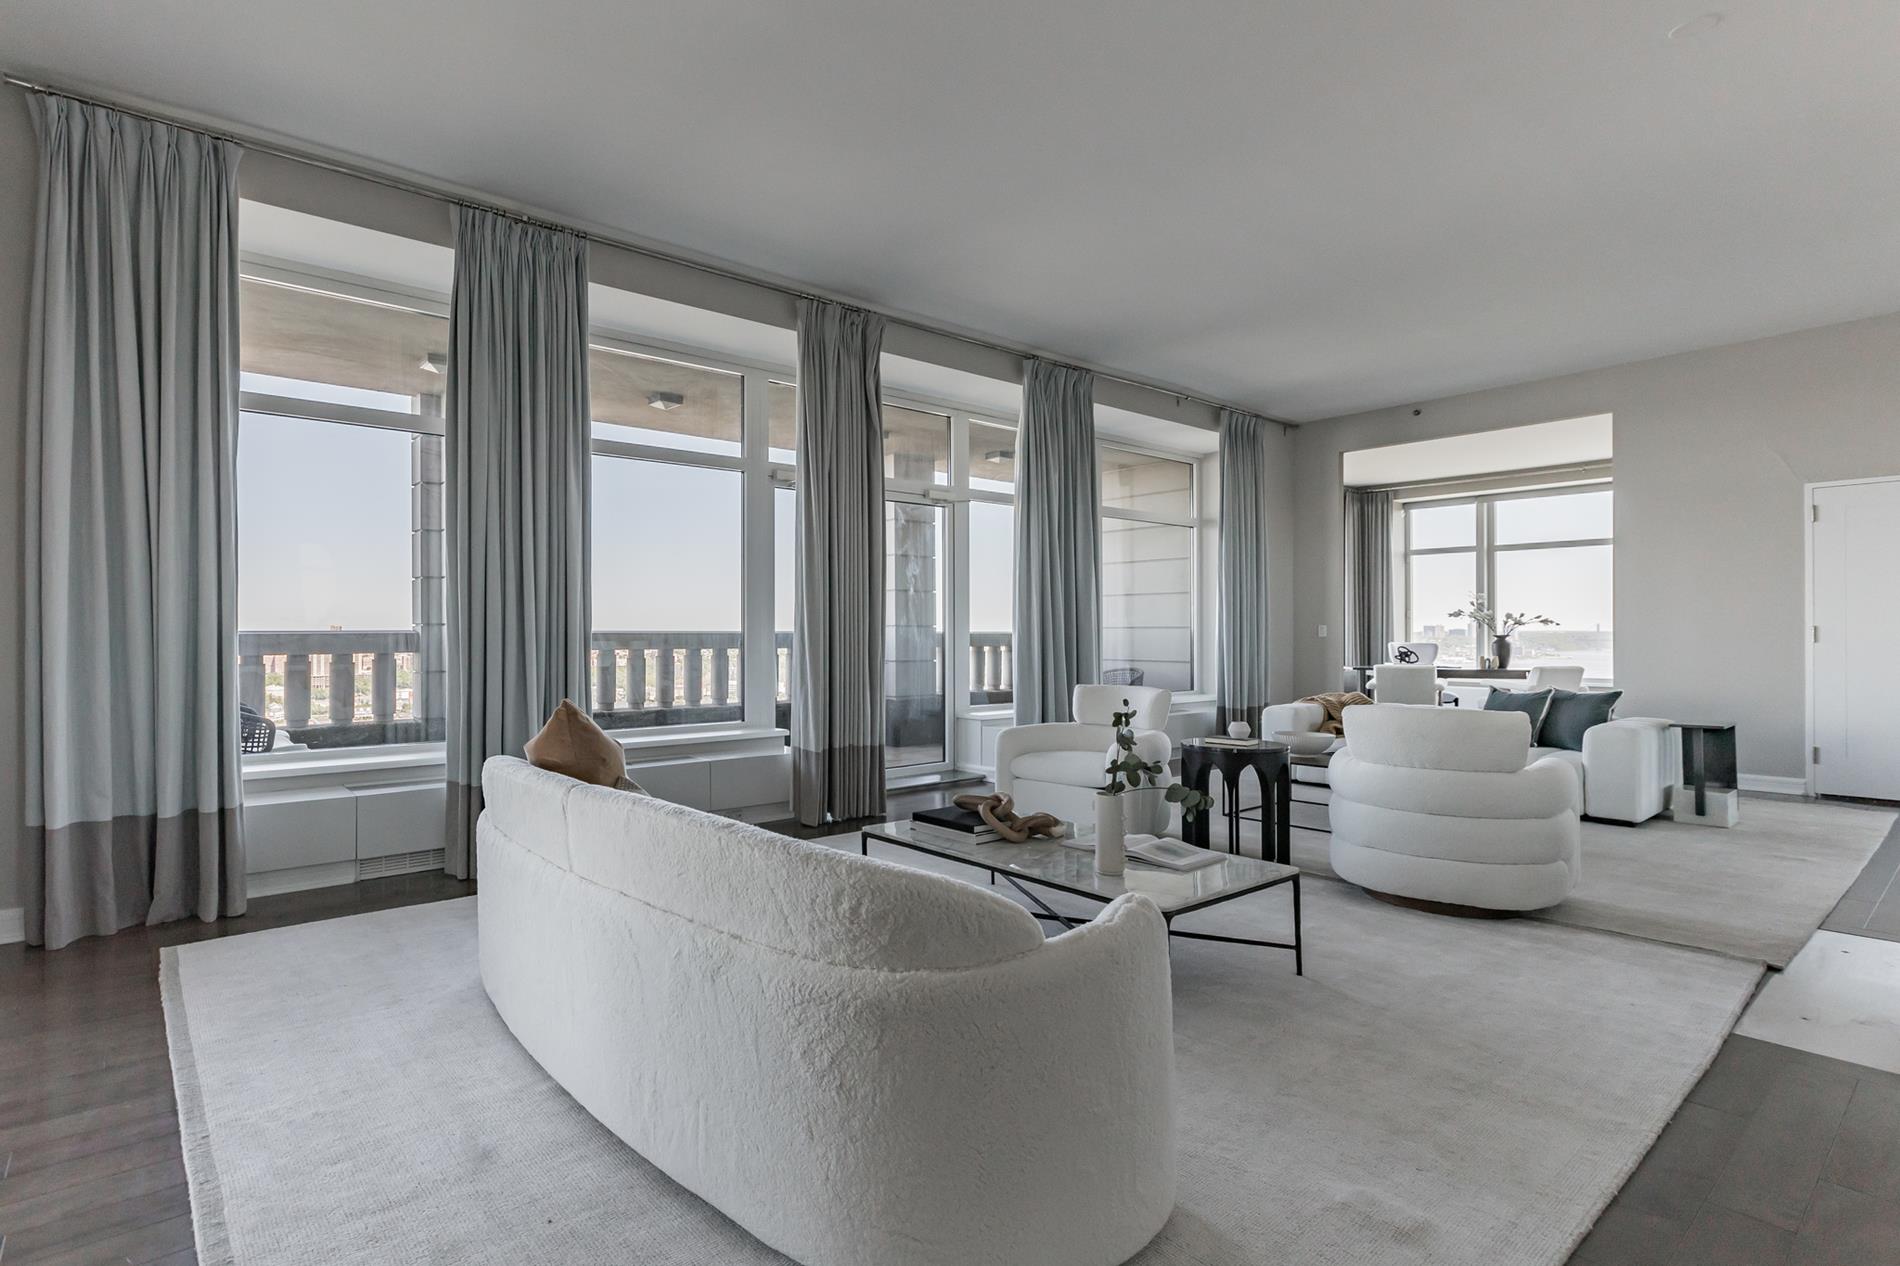 240 Riverside Boulevard Ph-Suite1, Lincoln Square, Upper West Side, NYC - 4 Bedrooms  
4.5 Bathrooms  
10 Rooms - 